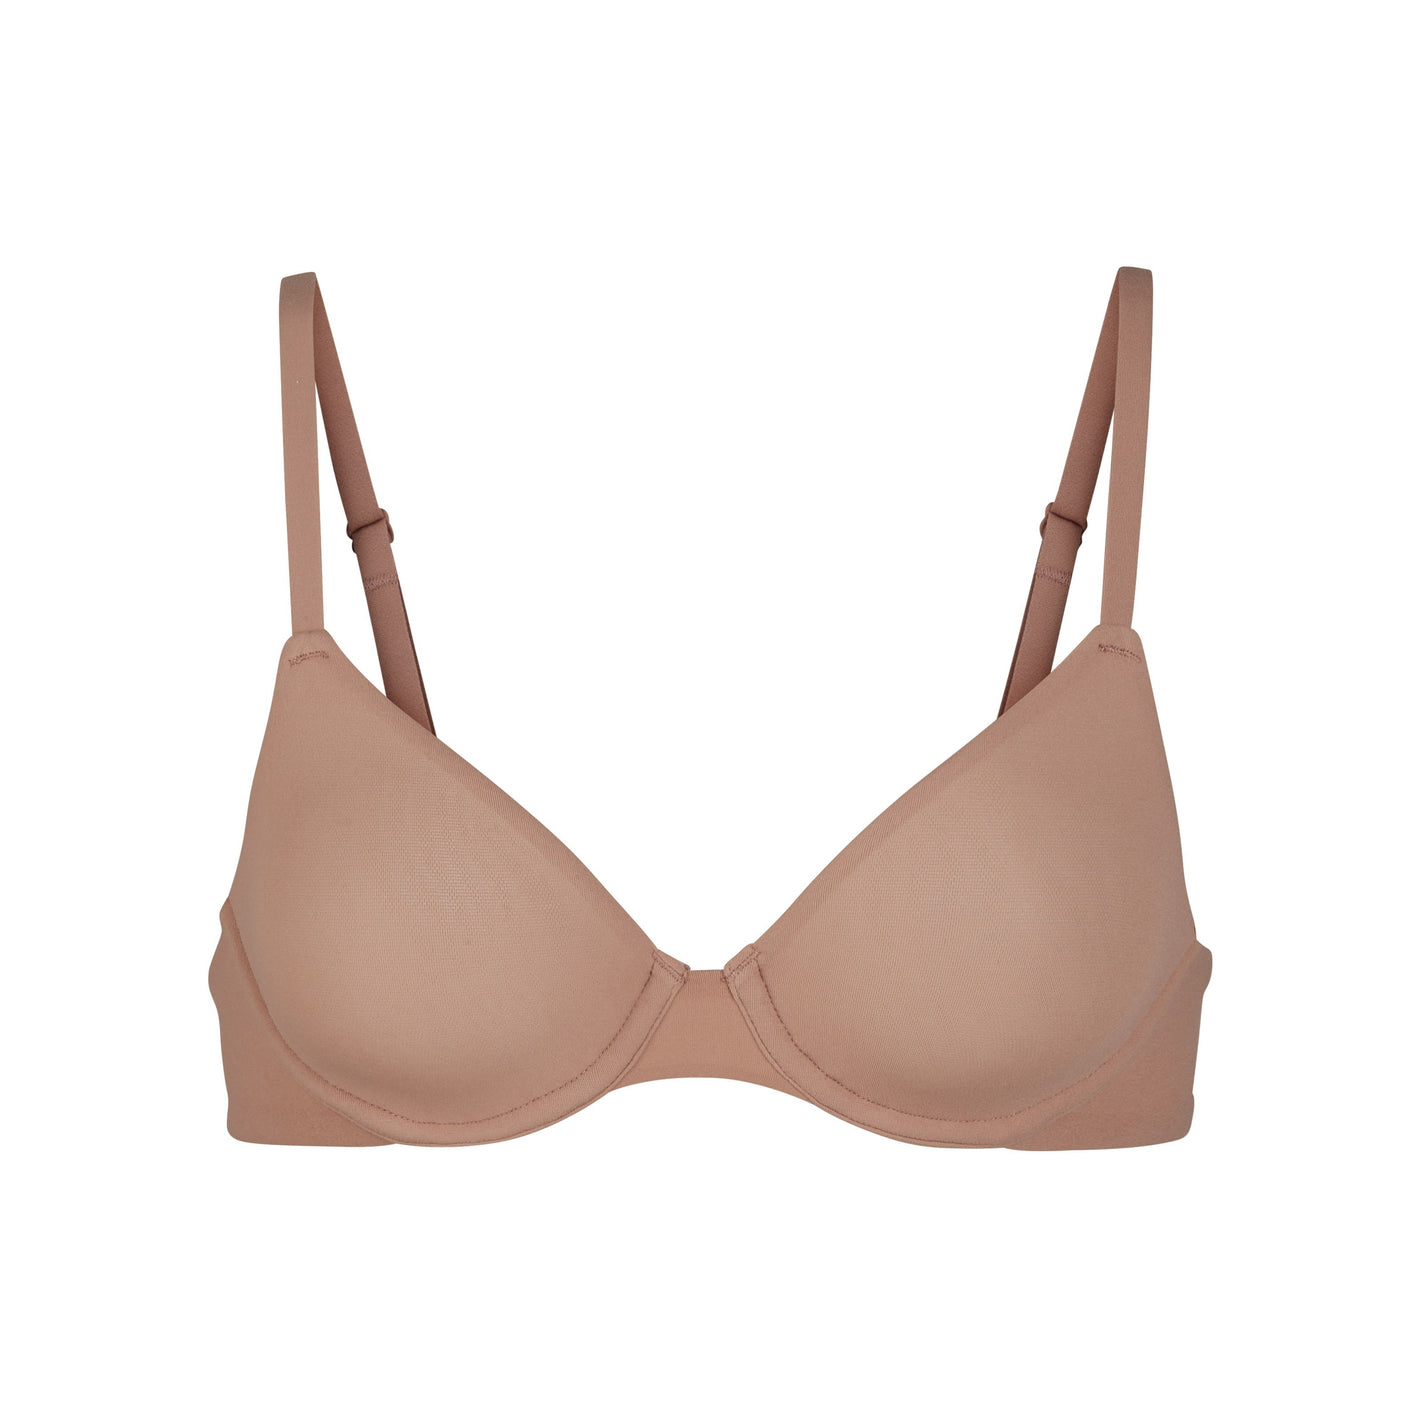 Track Skims Lace Unlined Balconette Bra - Sienna - 38 - A at Skims